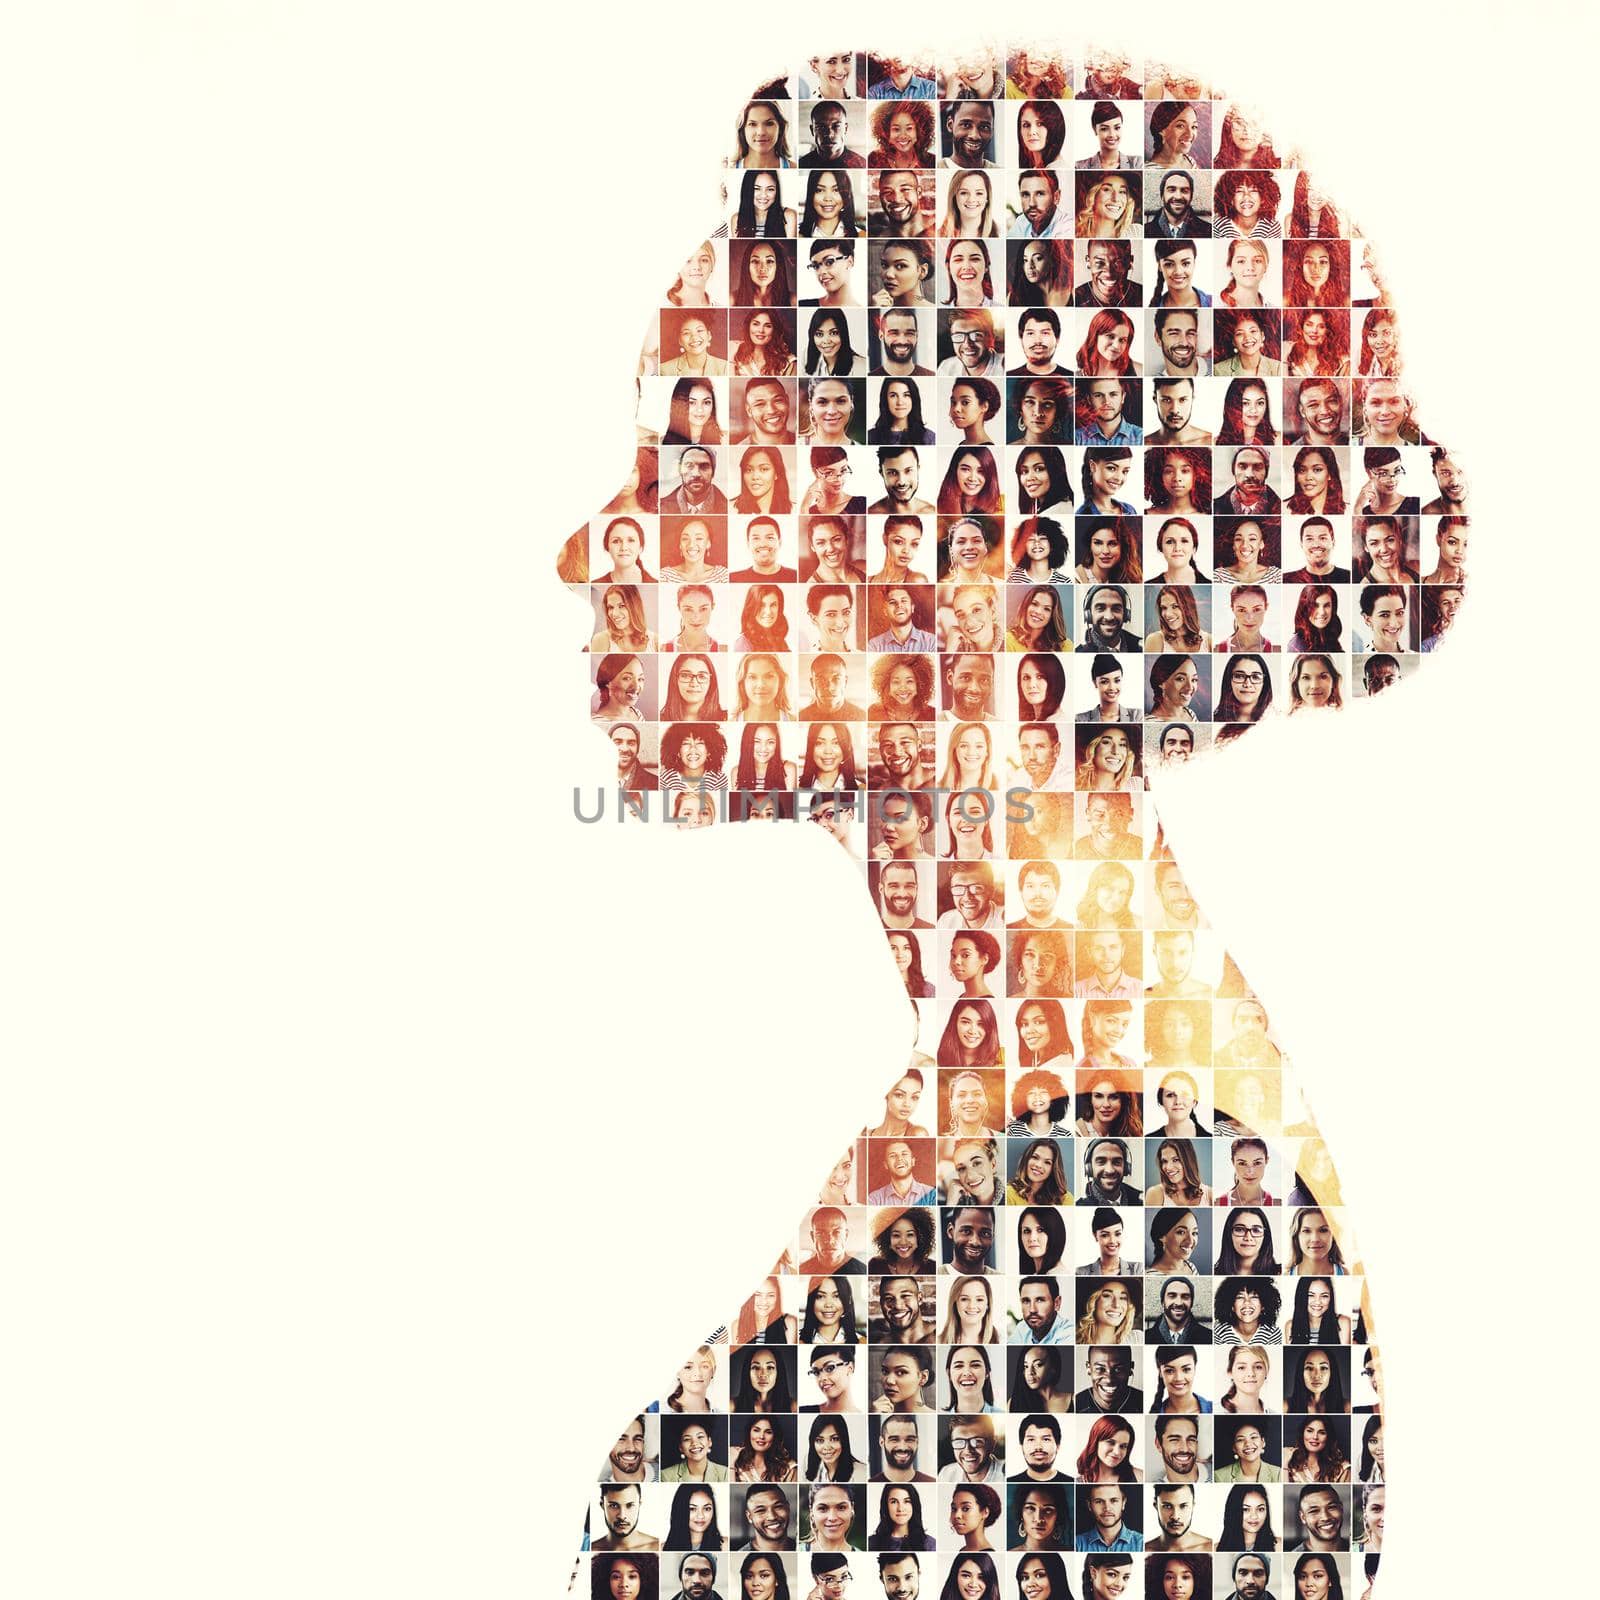 Composite image of a diverse group of people superimposed on a woman's profile